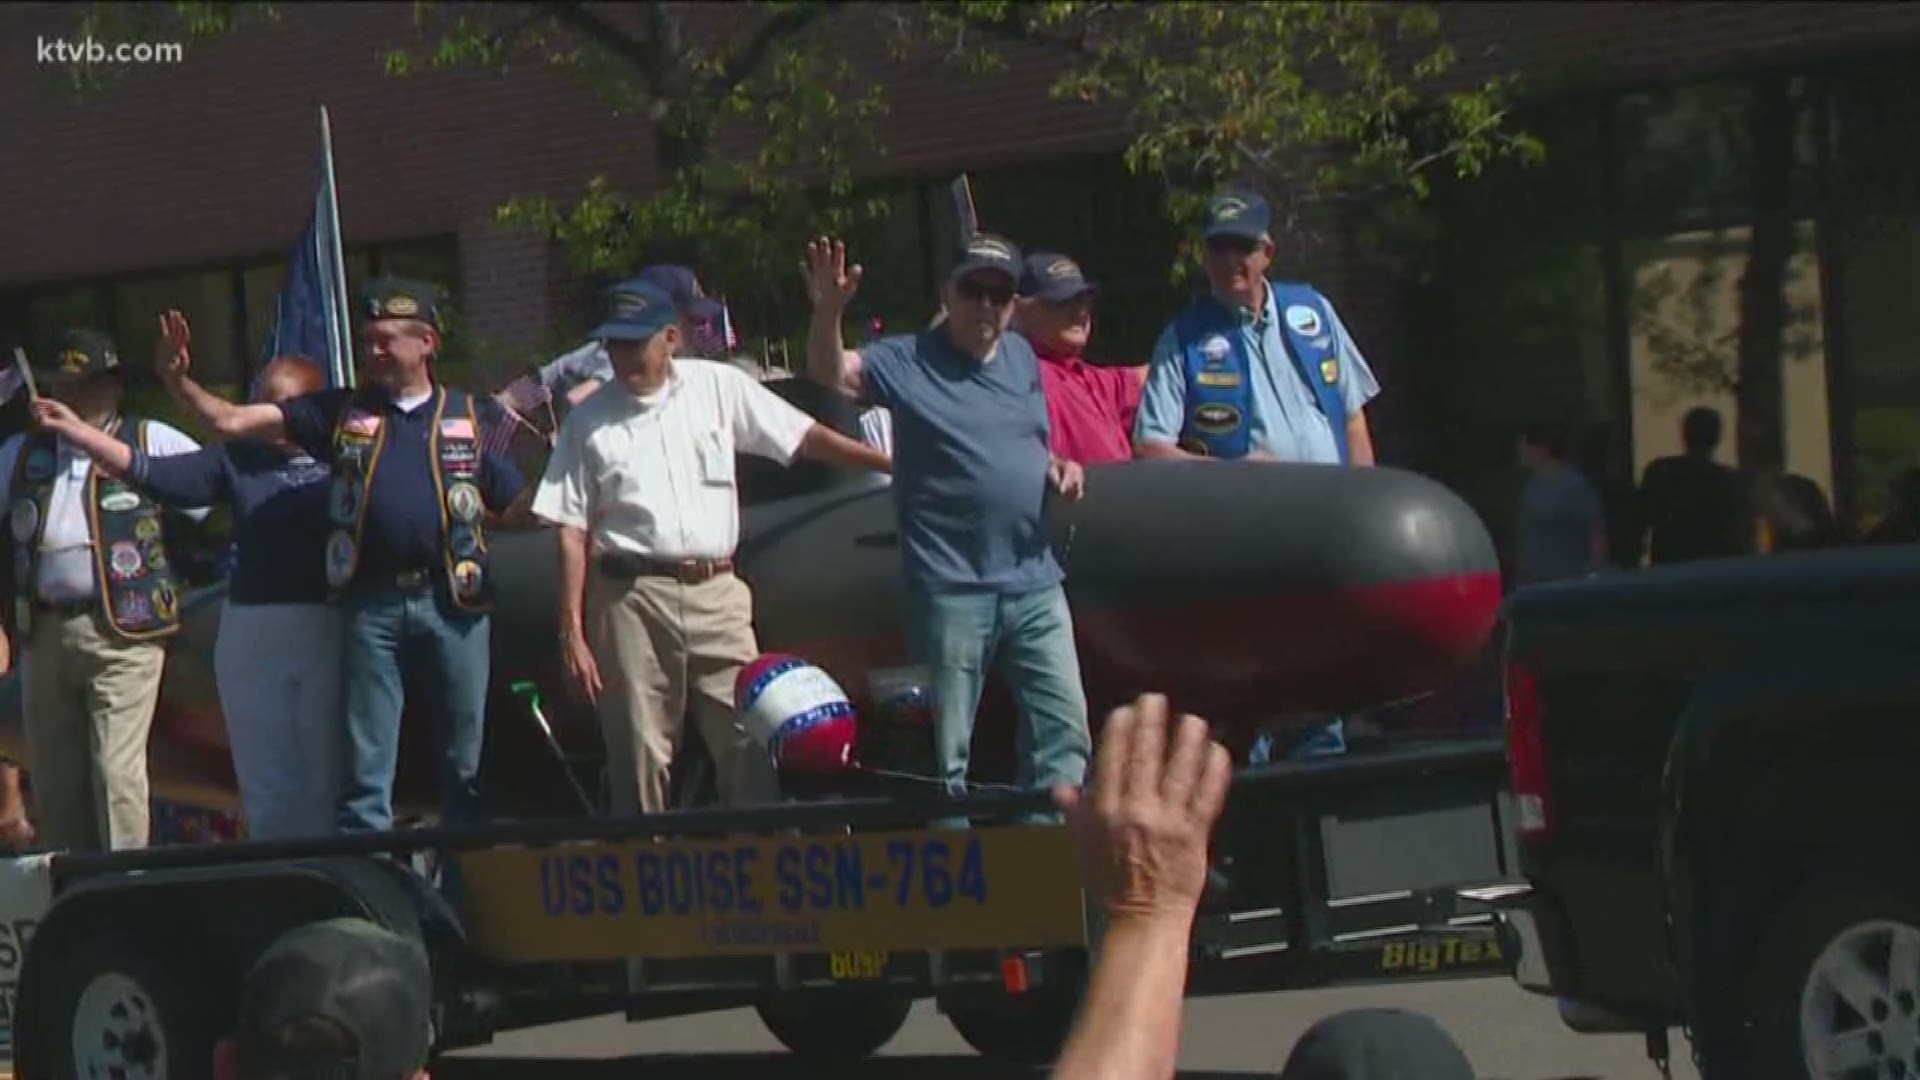 Thousands line the streets of Boise for Fourth of July parade